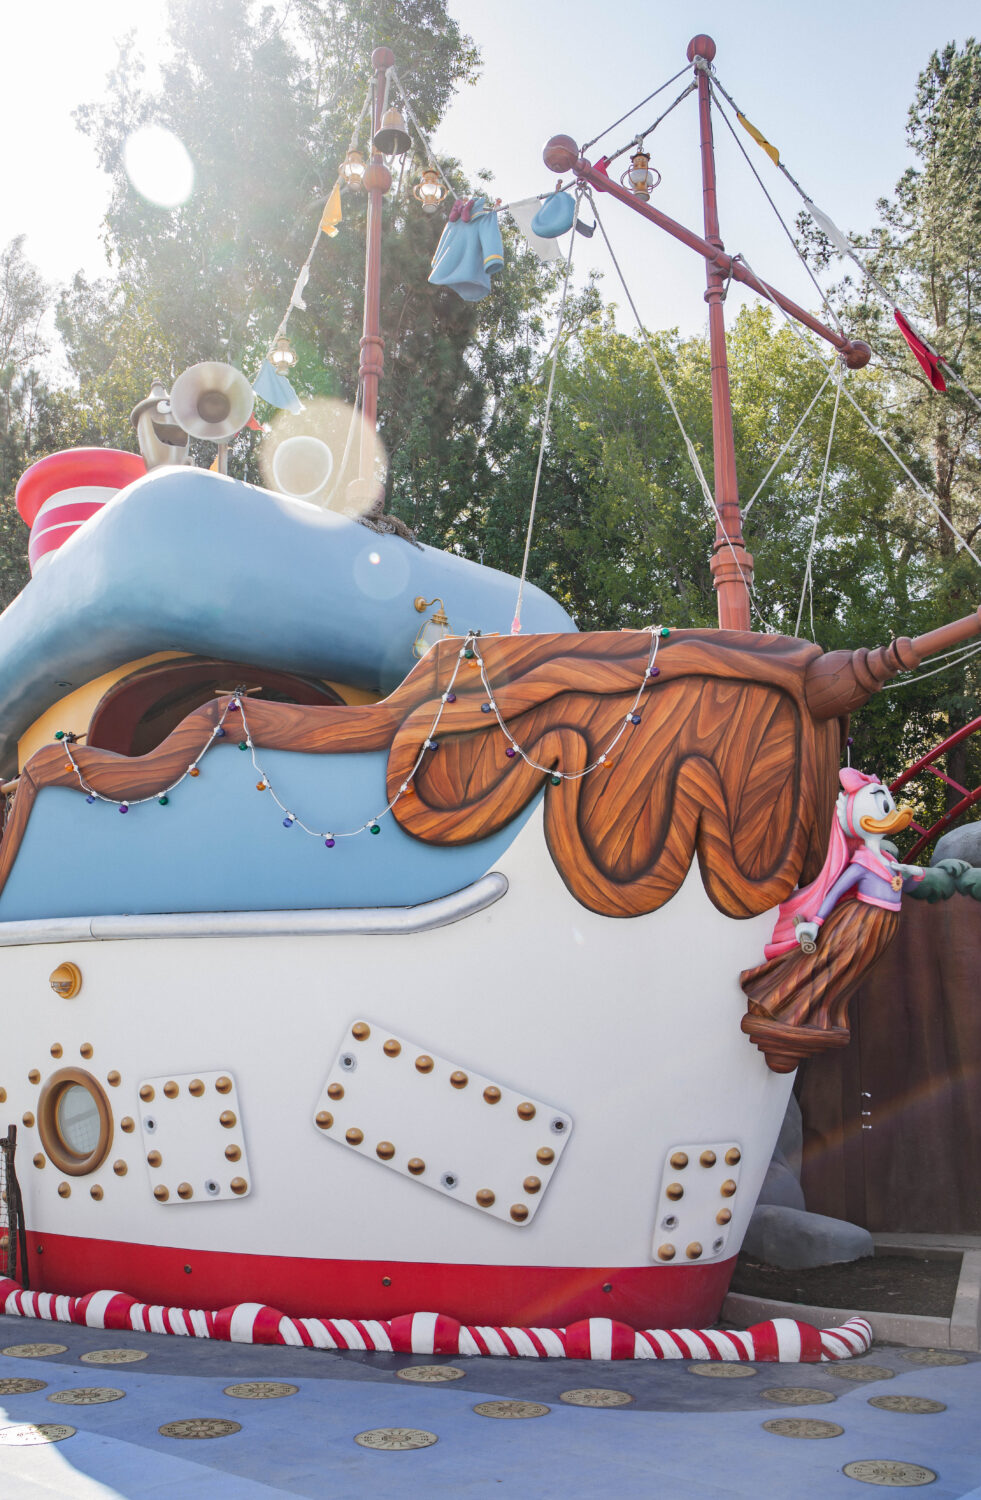 disneyland toontown rides and play areas: the ultimate guide 